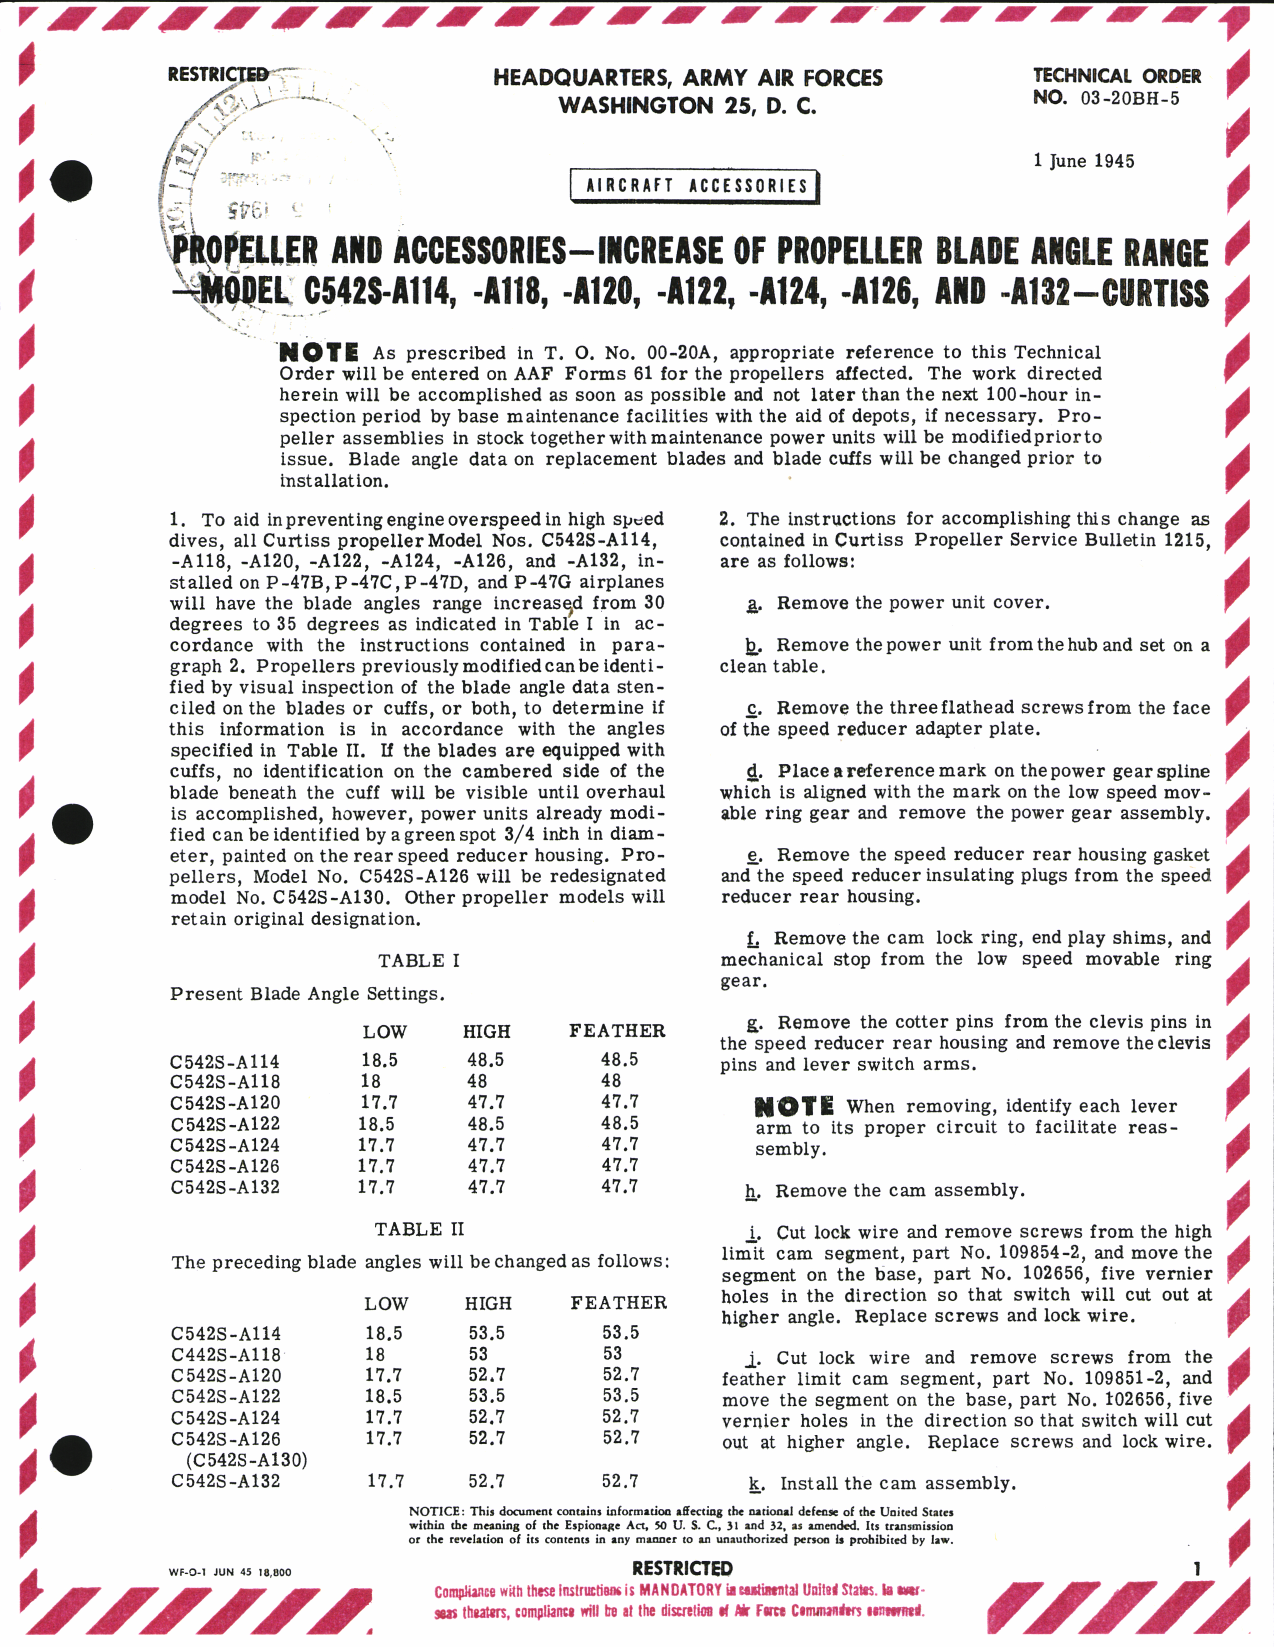 Sample page 1 from AirCorps Library document: Increase of Propeller Blade Angle Range for Models C542S-A114, -A118, -A120, -A122, -A124, -A126, and -A132